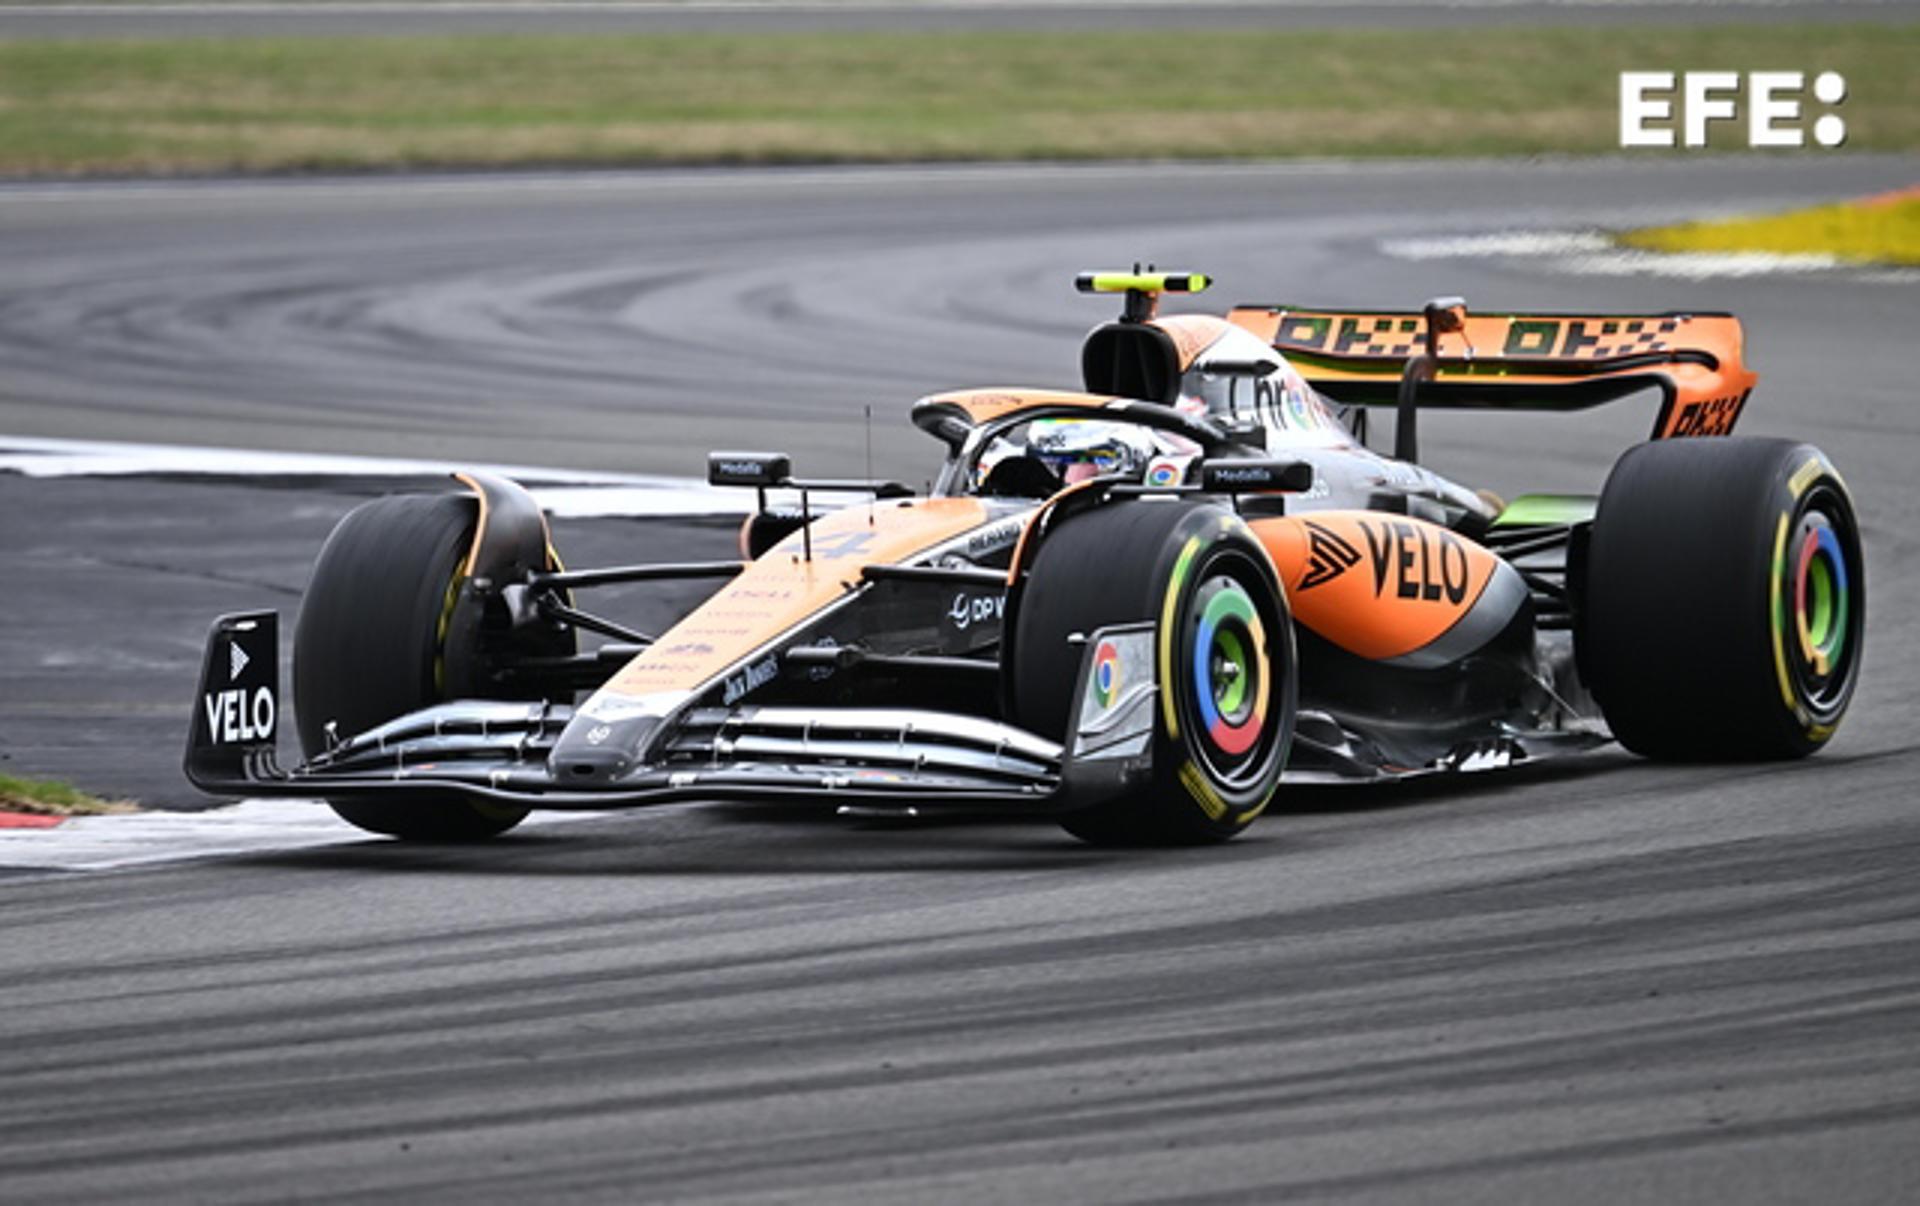 Formula One driver Lando Norris (McLaren) in action during practice for the British Grand Prix at the Silverstone Circuit in Silverstone, England, on 8 July 2023. EFE/EPA/CHRISTIAN BRUNA
